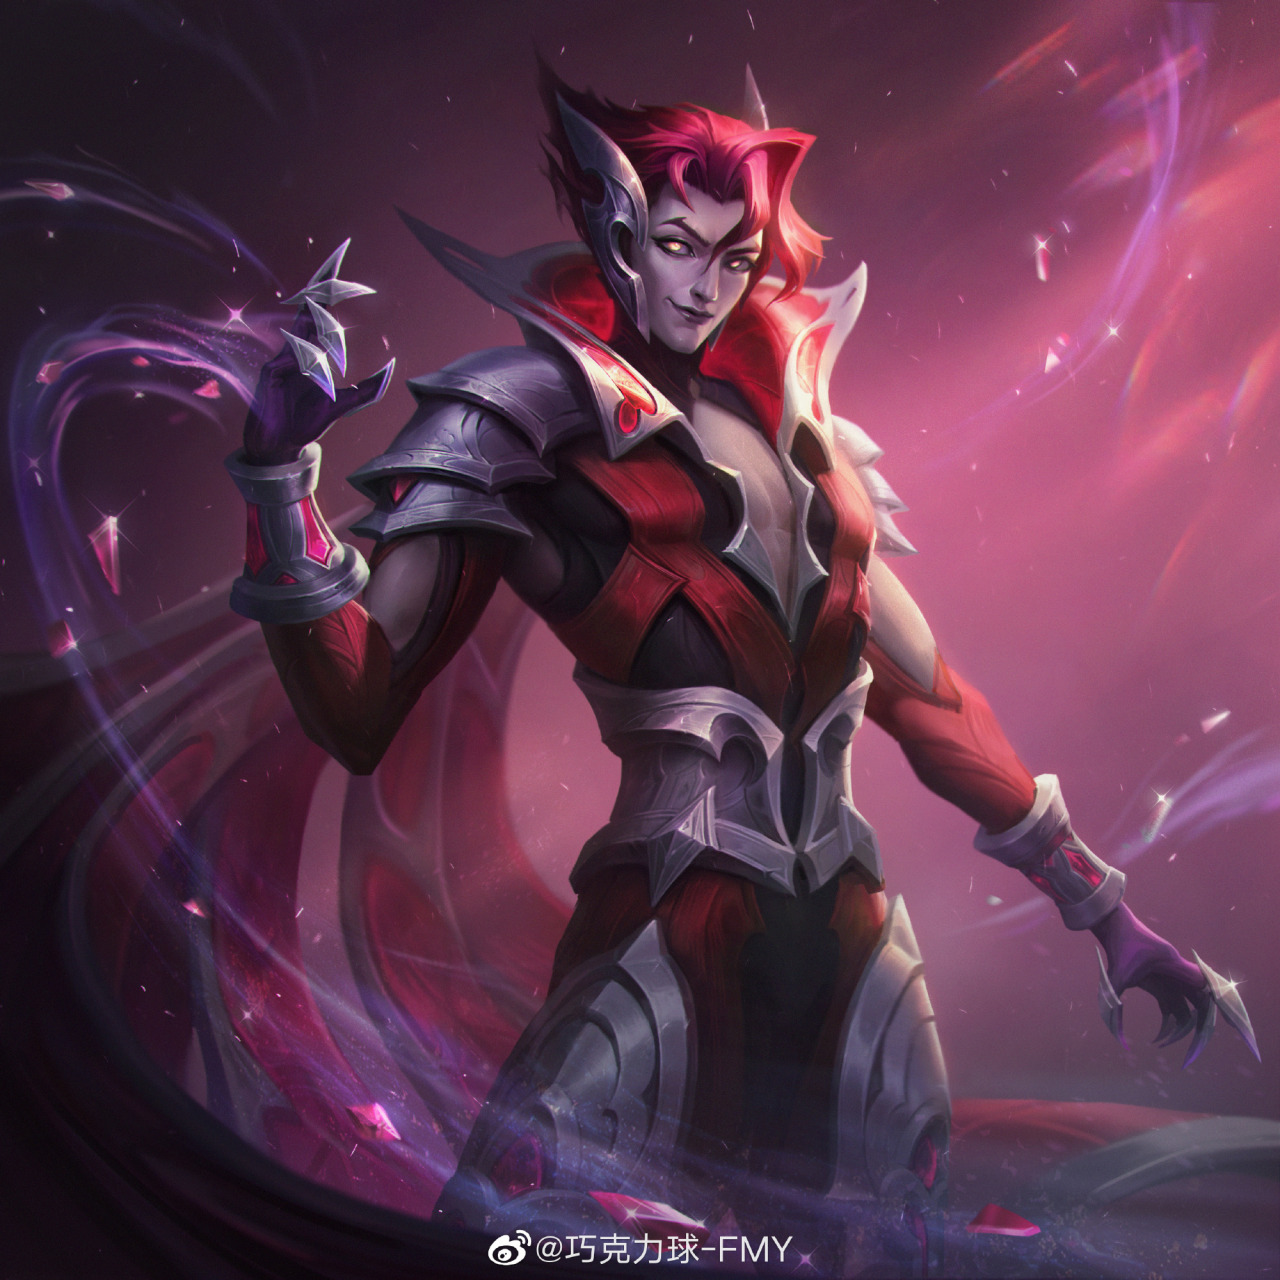 Broken Covenant Tharouu on Twitter  Champions league of legends, League of  legends characters, Lol league of legends